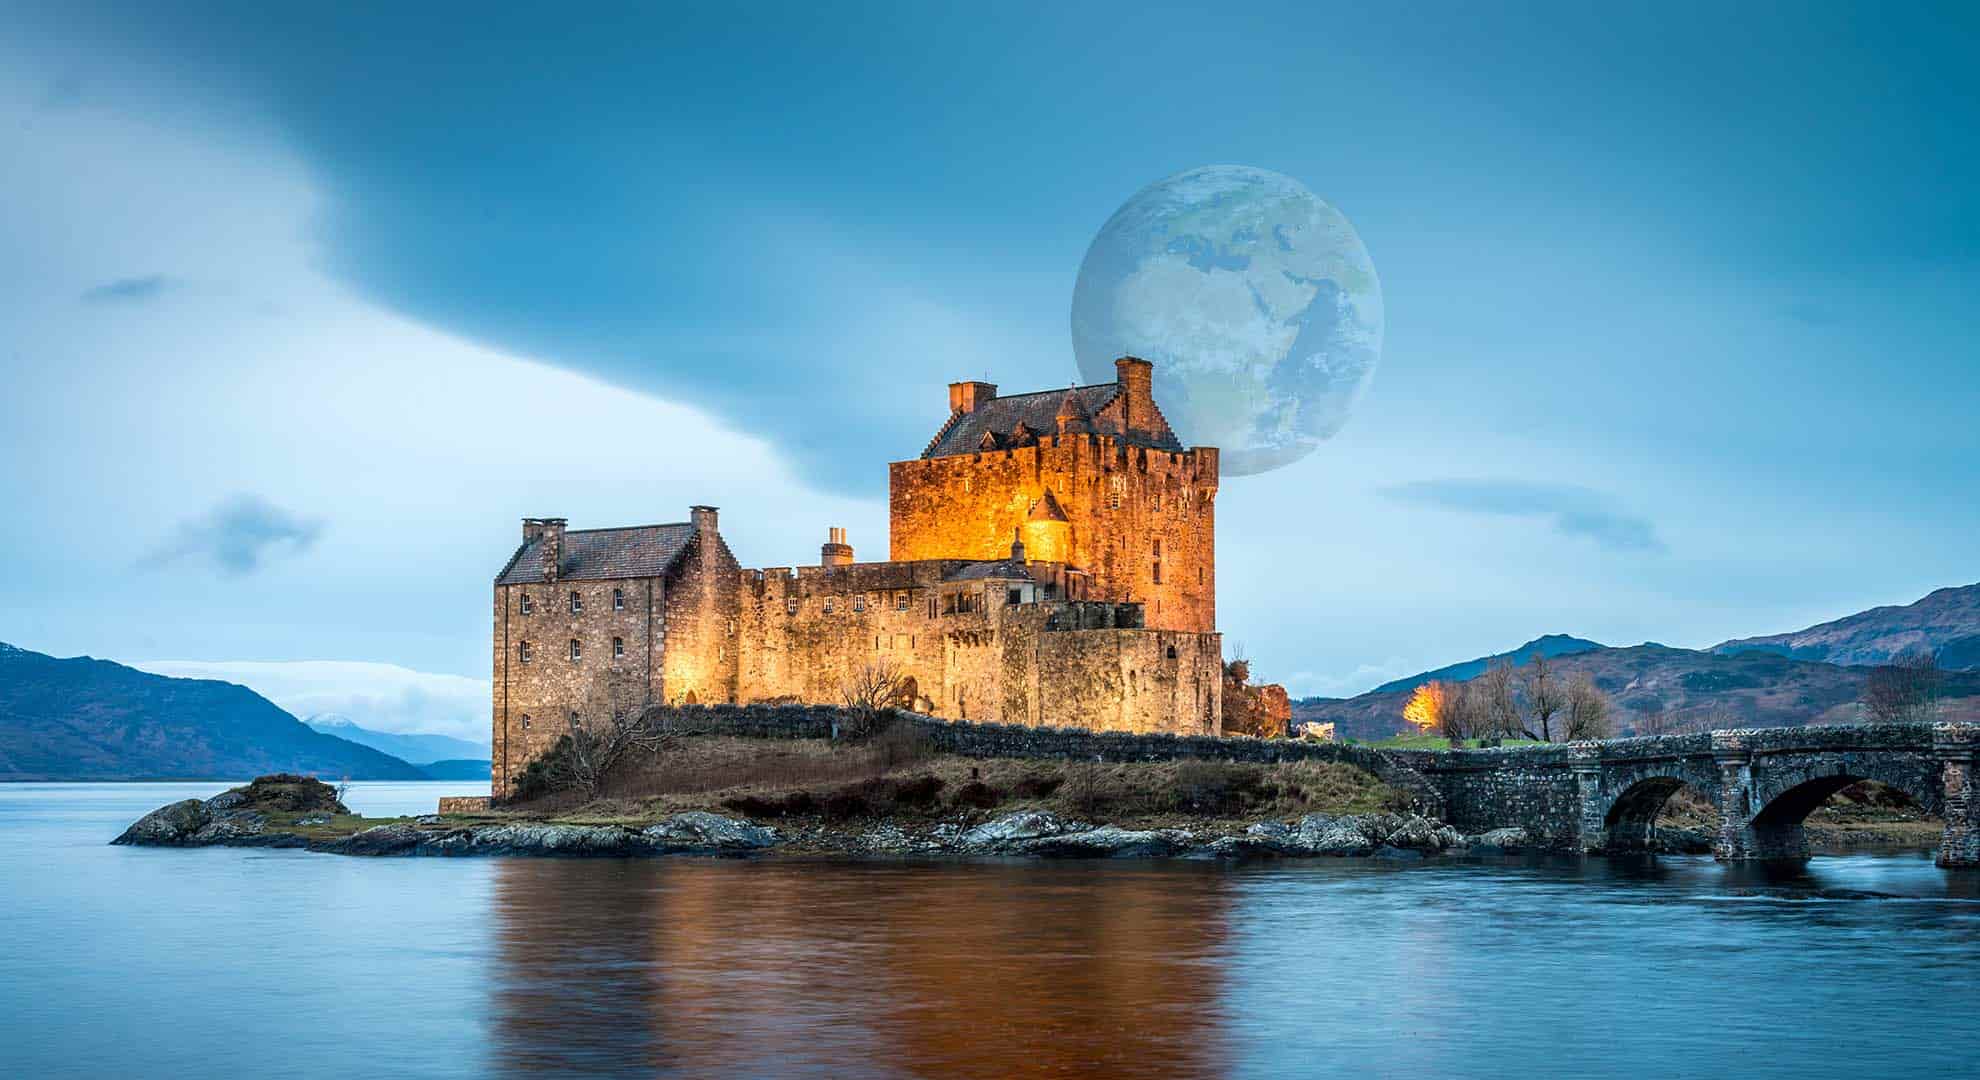 Image of Eilean Donan Castle with another planet earth behind it